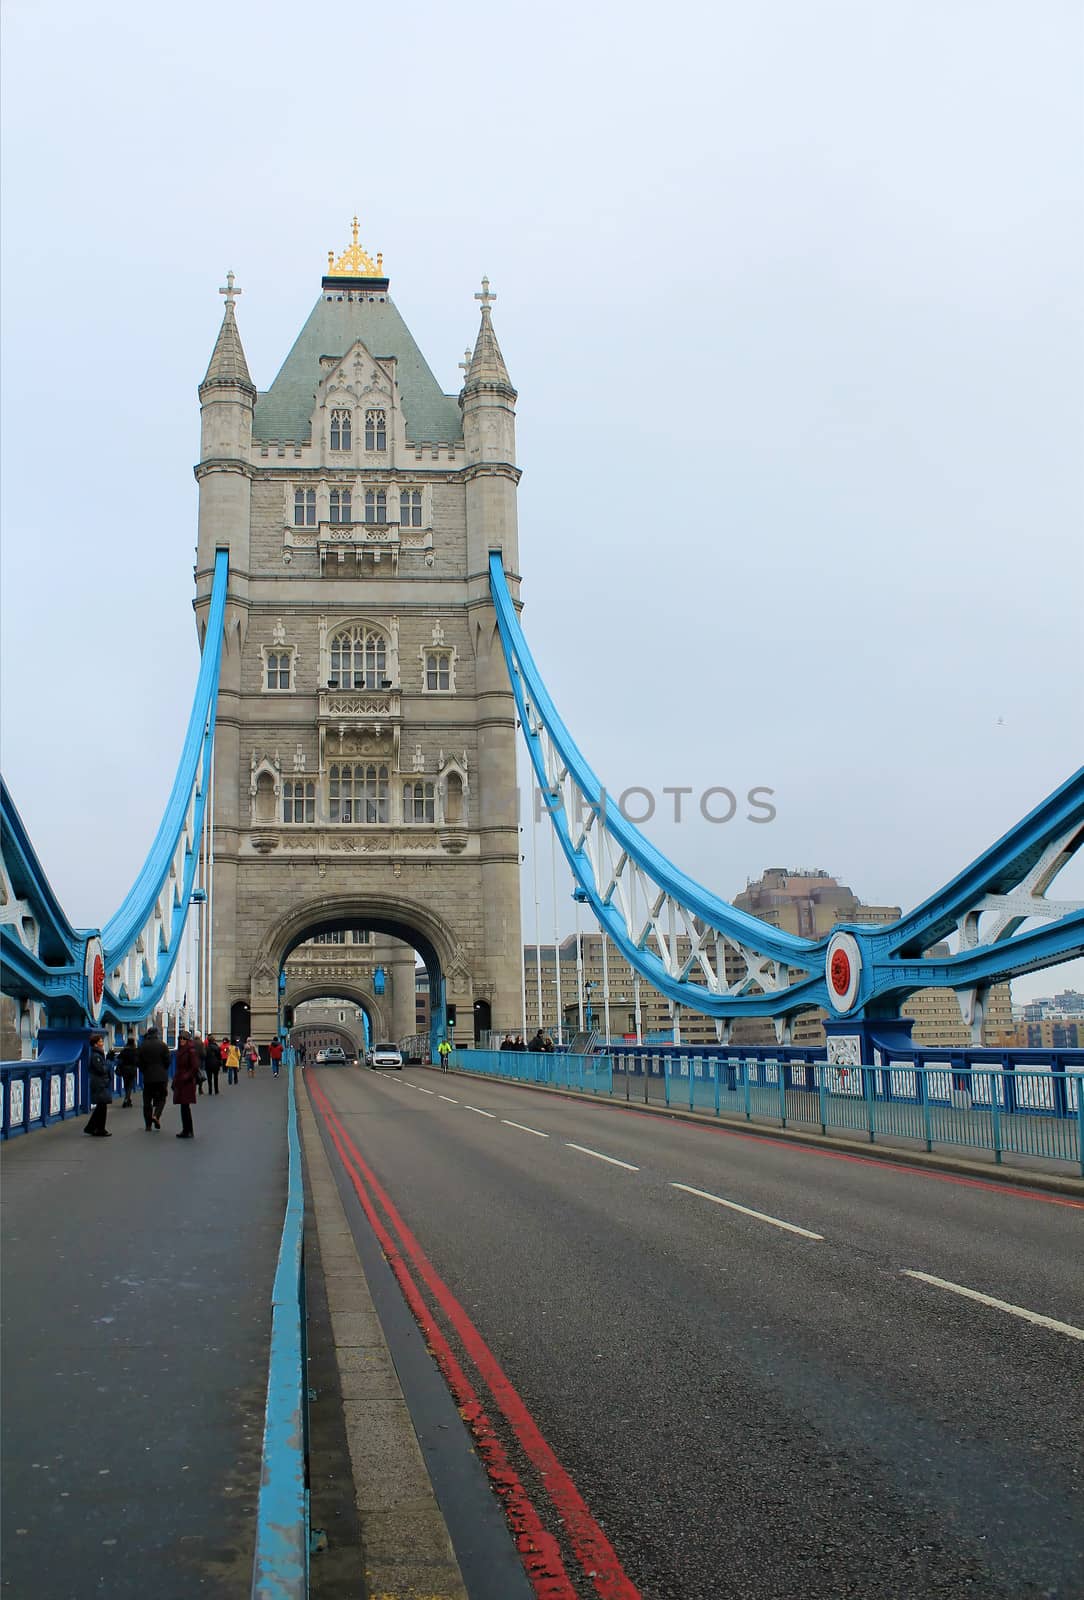 Famous London Tower Bridge, above Thames River by ptxgarfield